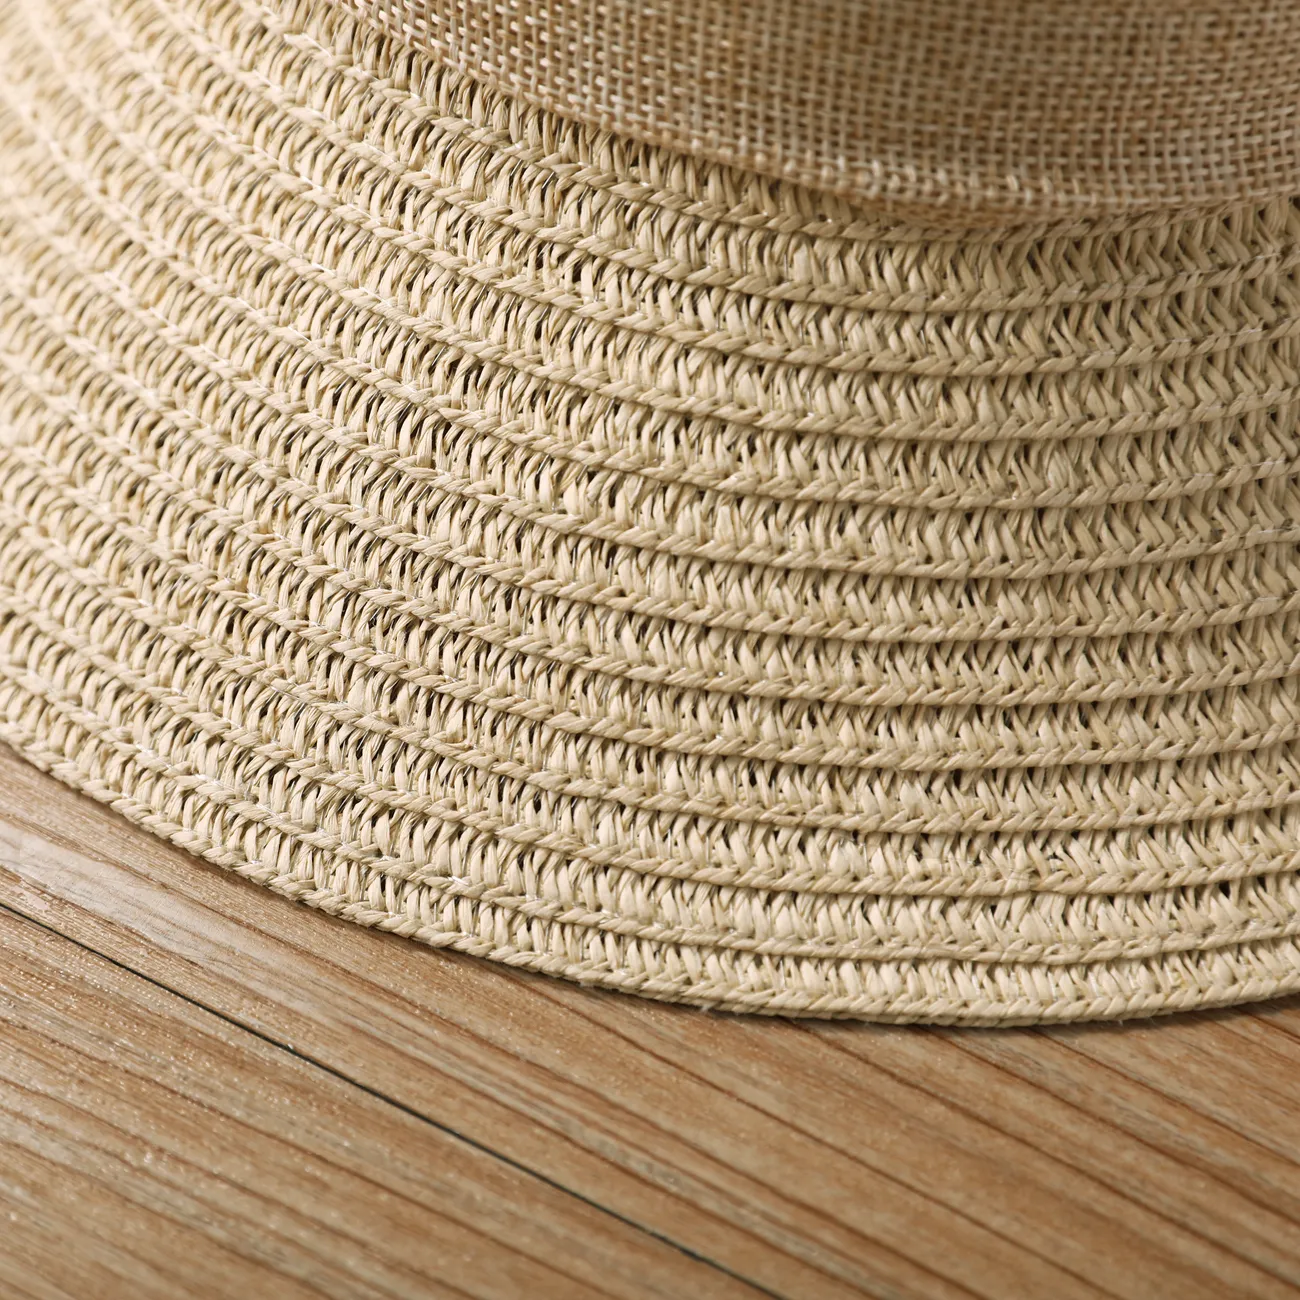 Summer Sun Hat for Girls with Bowknot and Rolled Brim, Straw Beach Hat for Travel and Vacation Beige big image 1